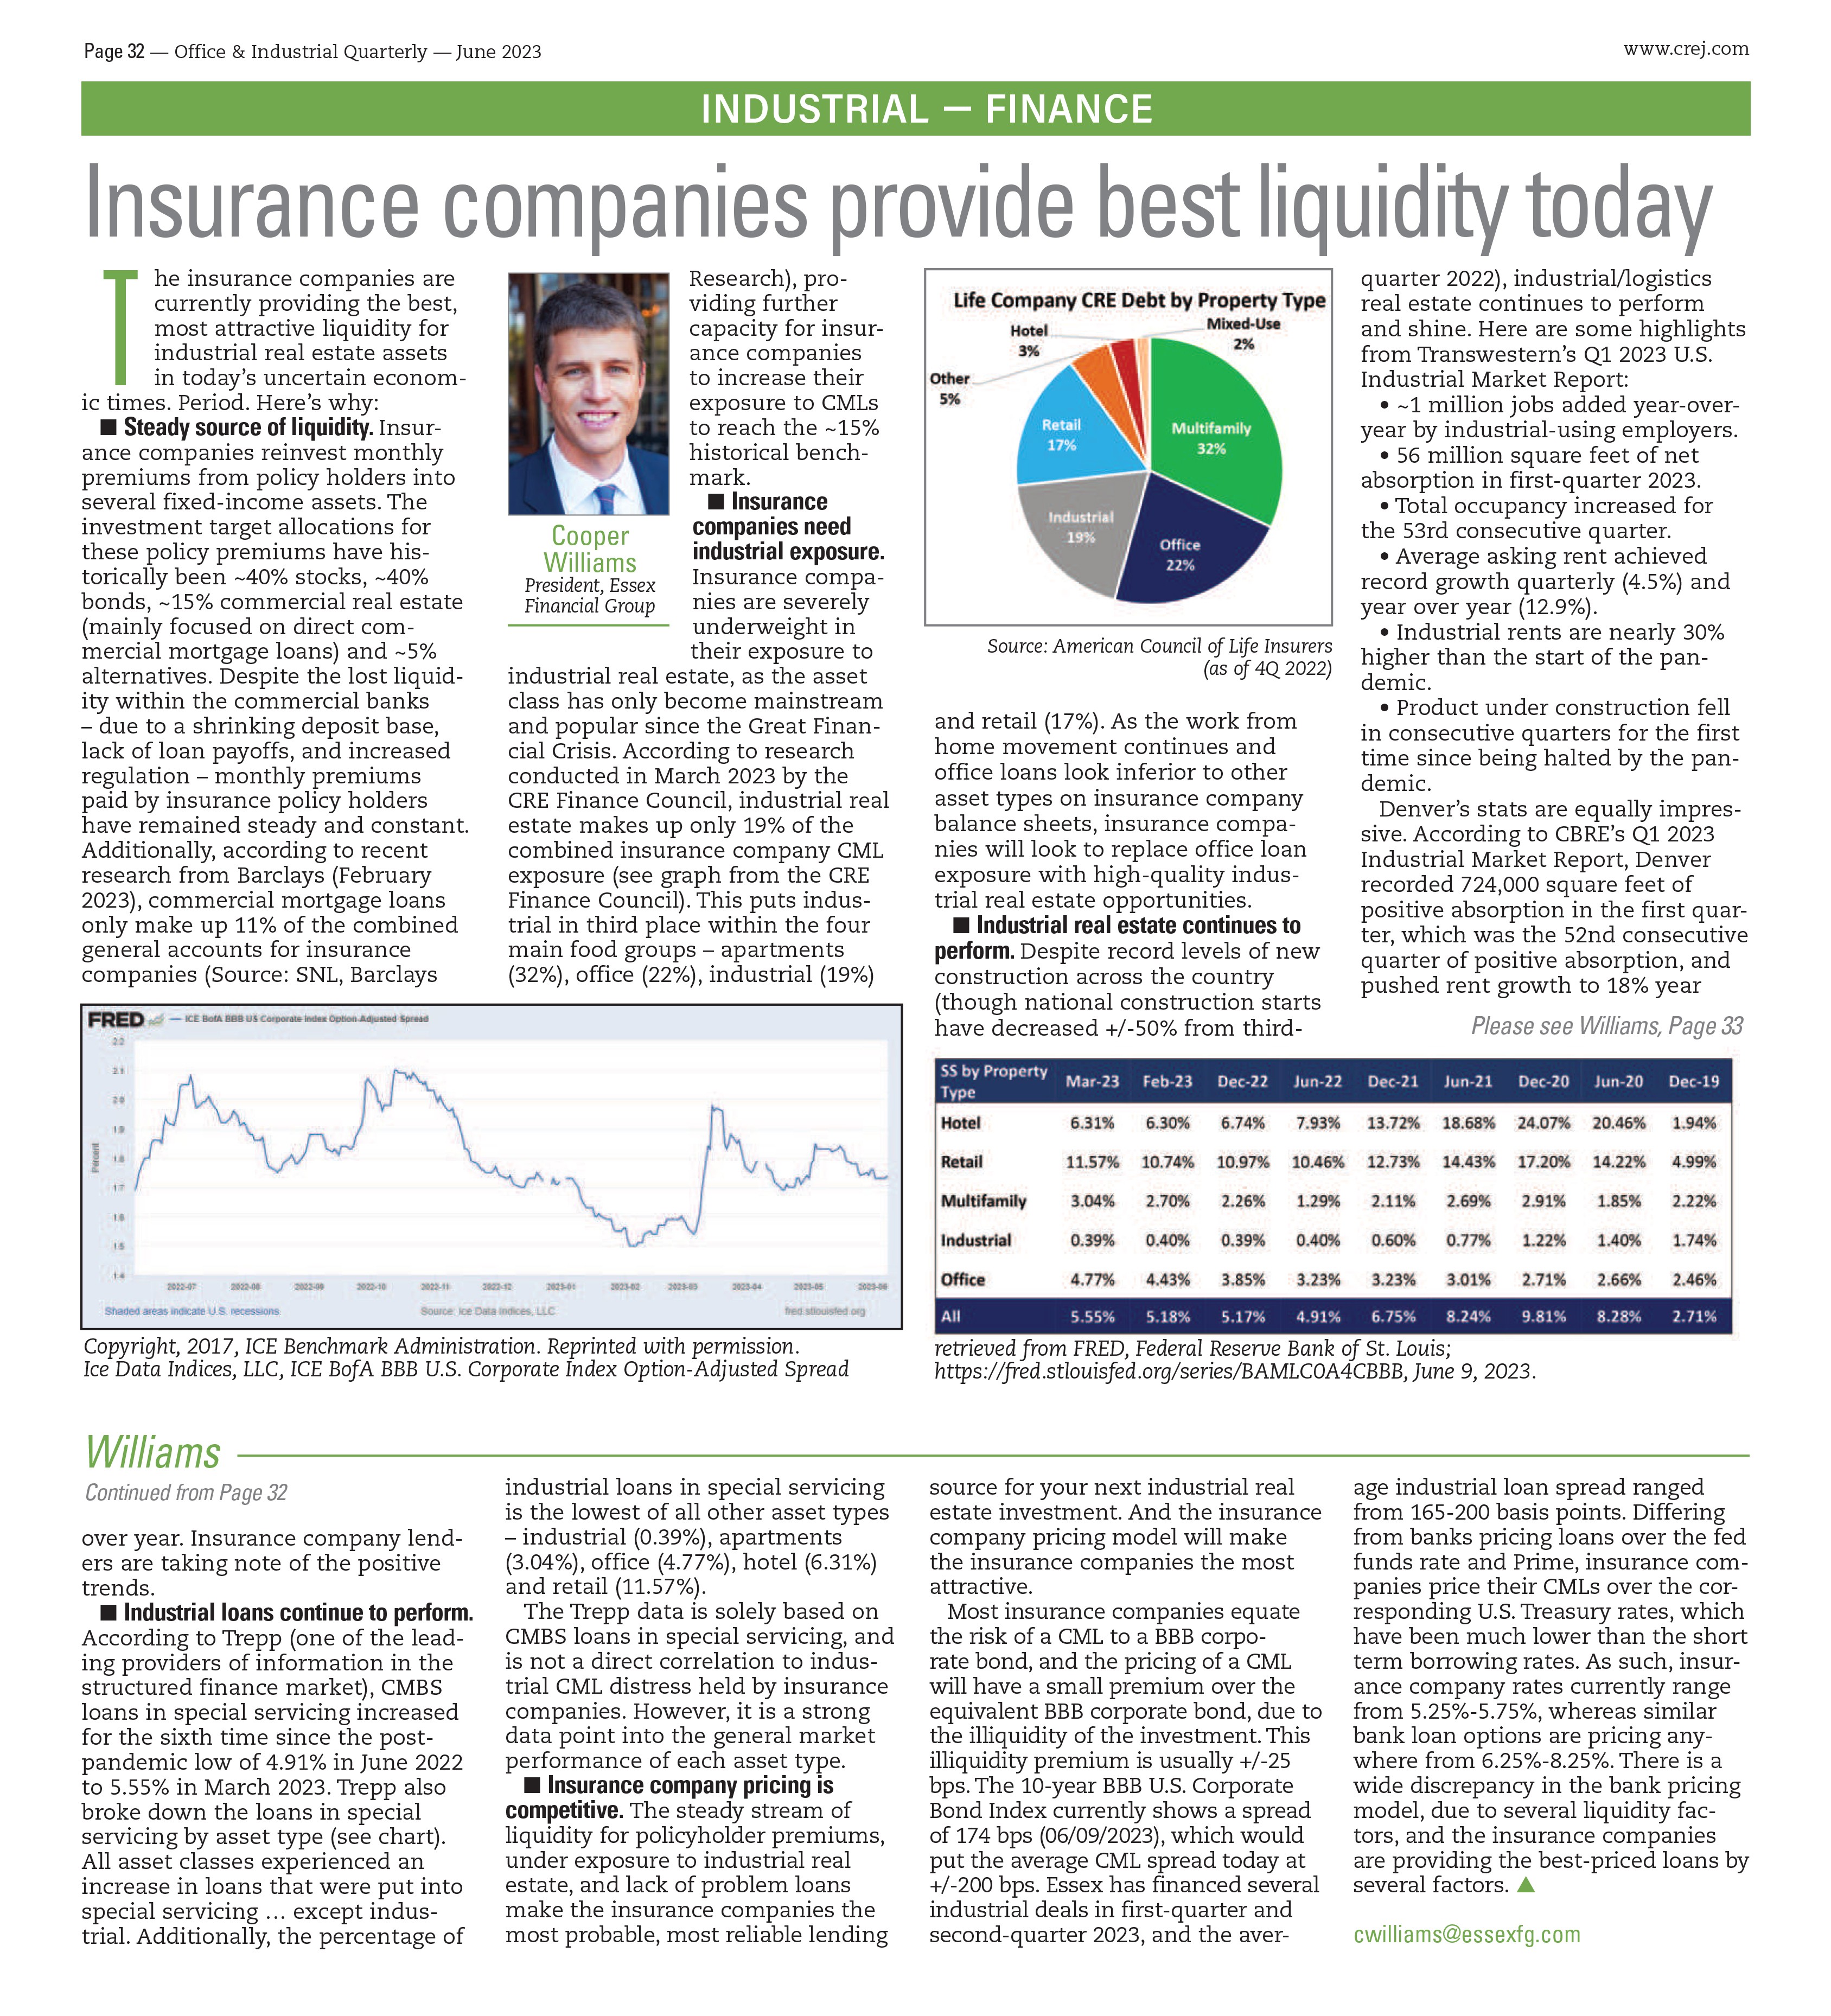 Insurance Companies Provide Best Liquidity Today Featured Image